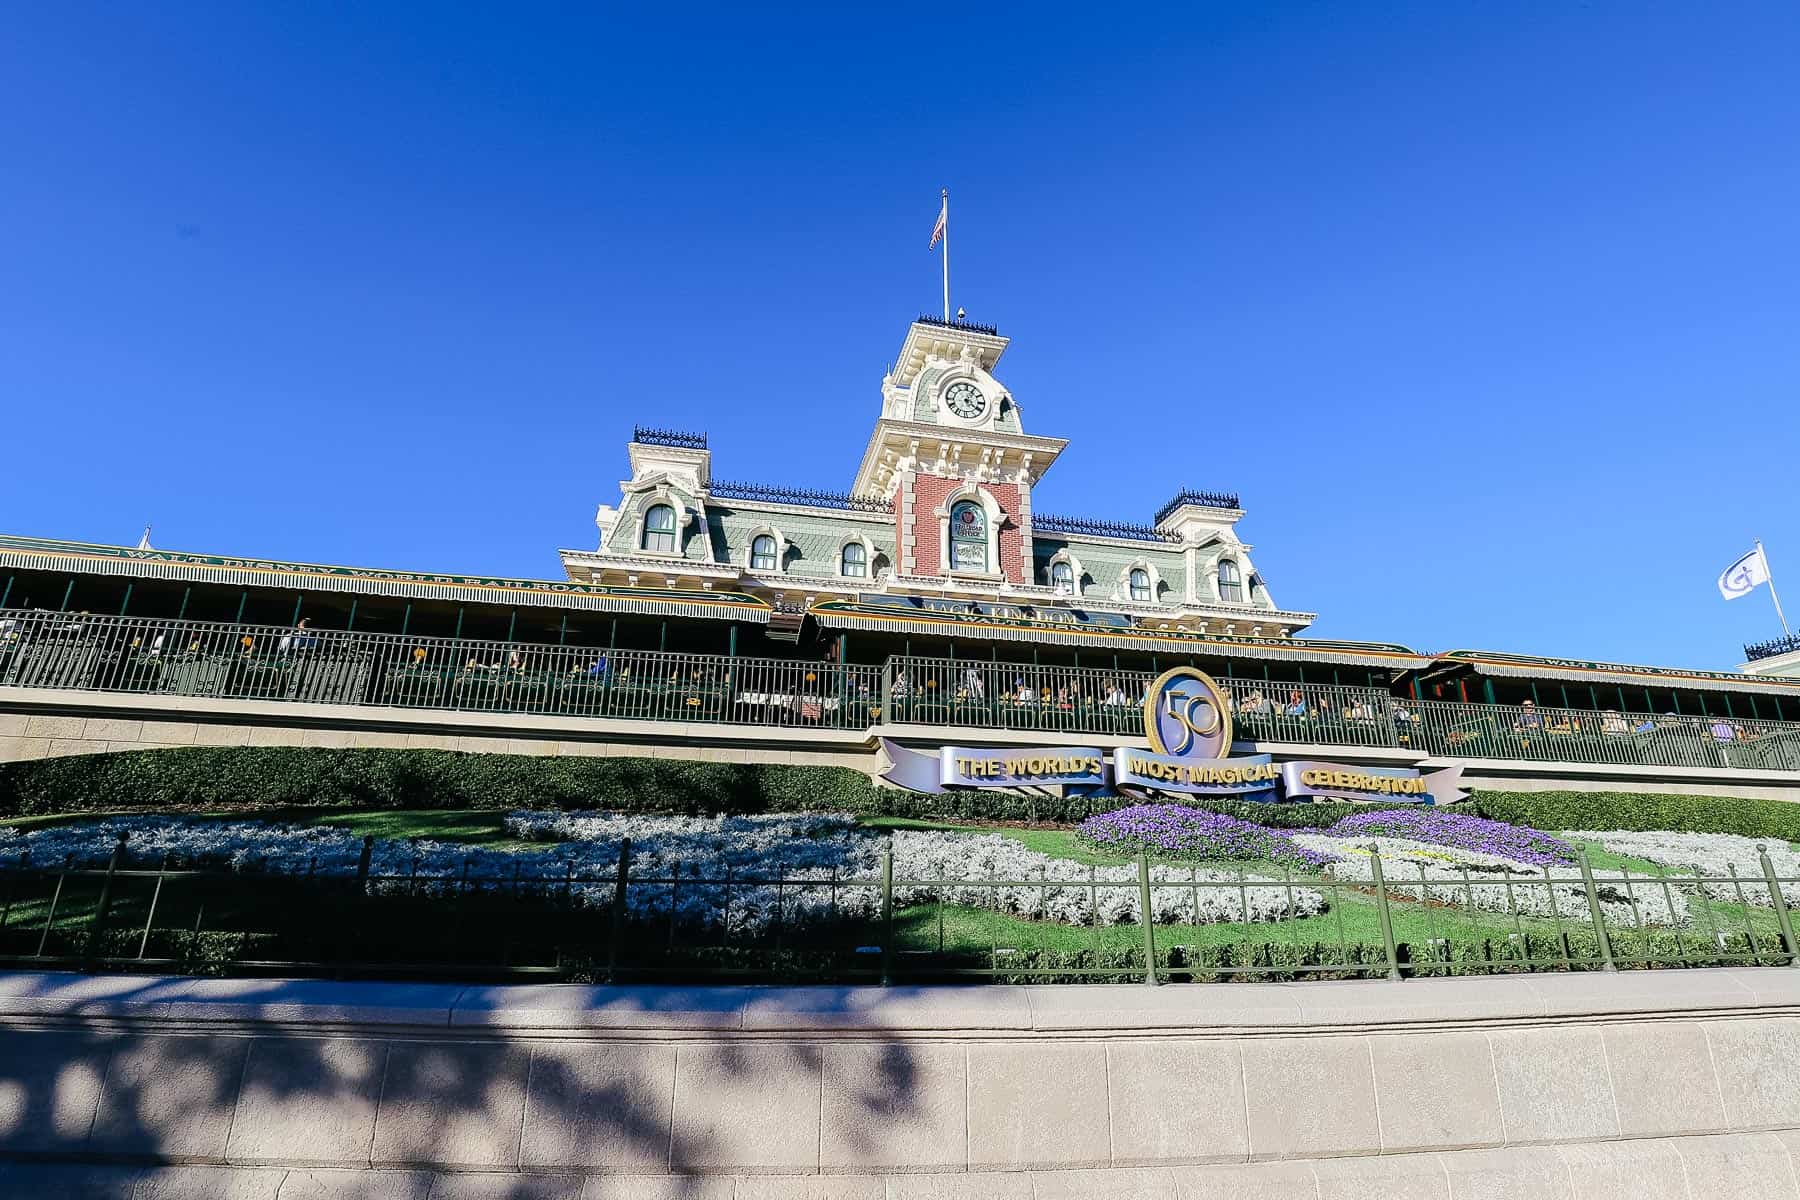 Main Street Station as seen from the entrance of Magic Kingdom 